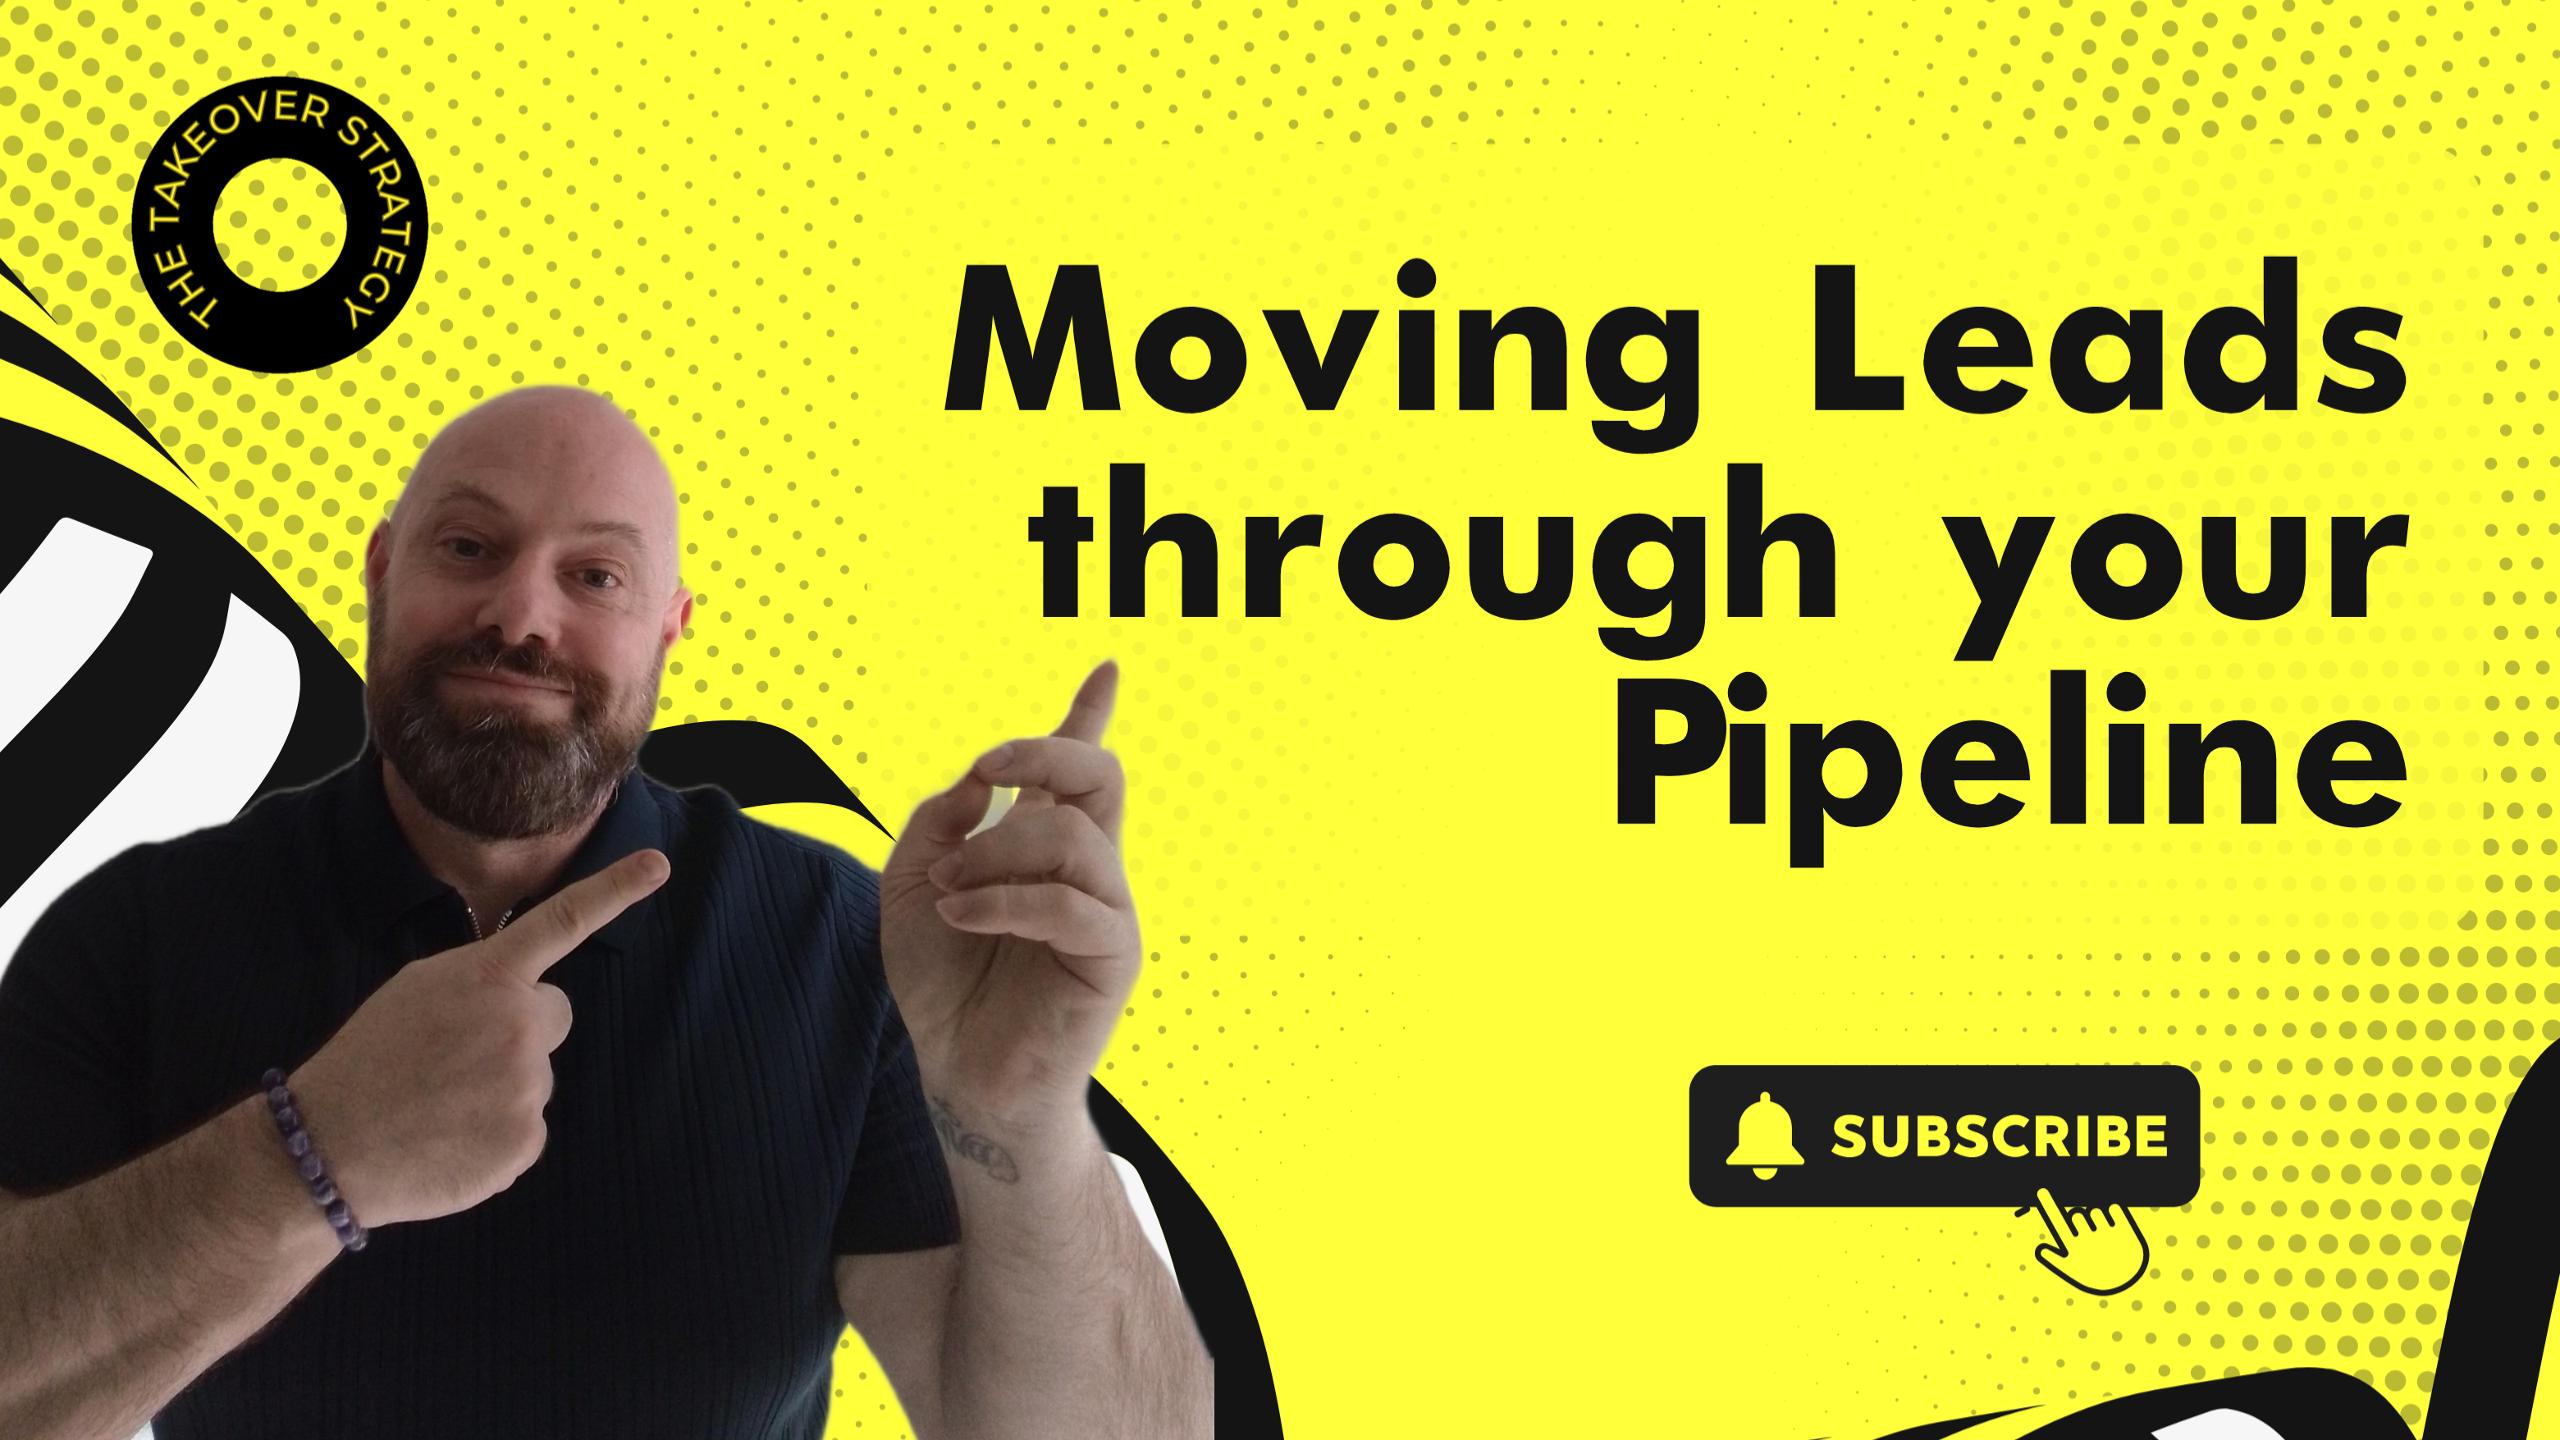 Moving Leads through your Pipeline